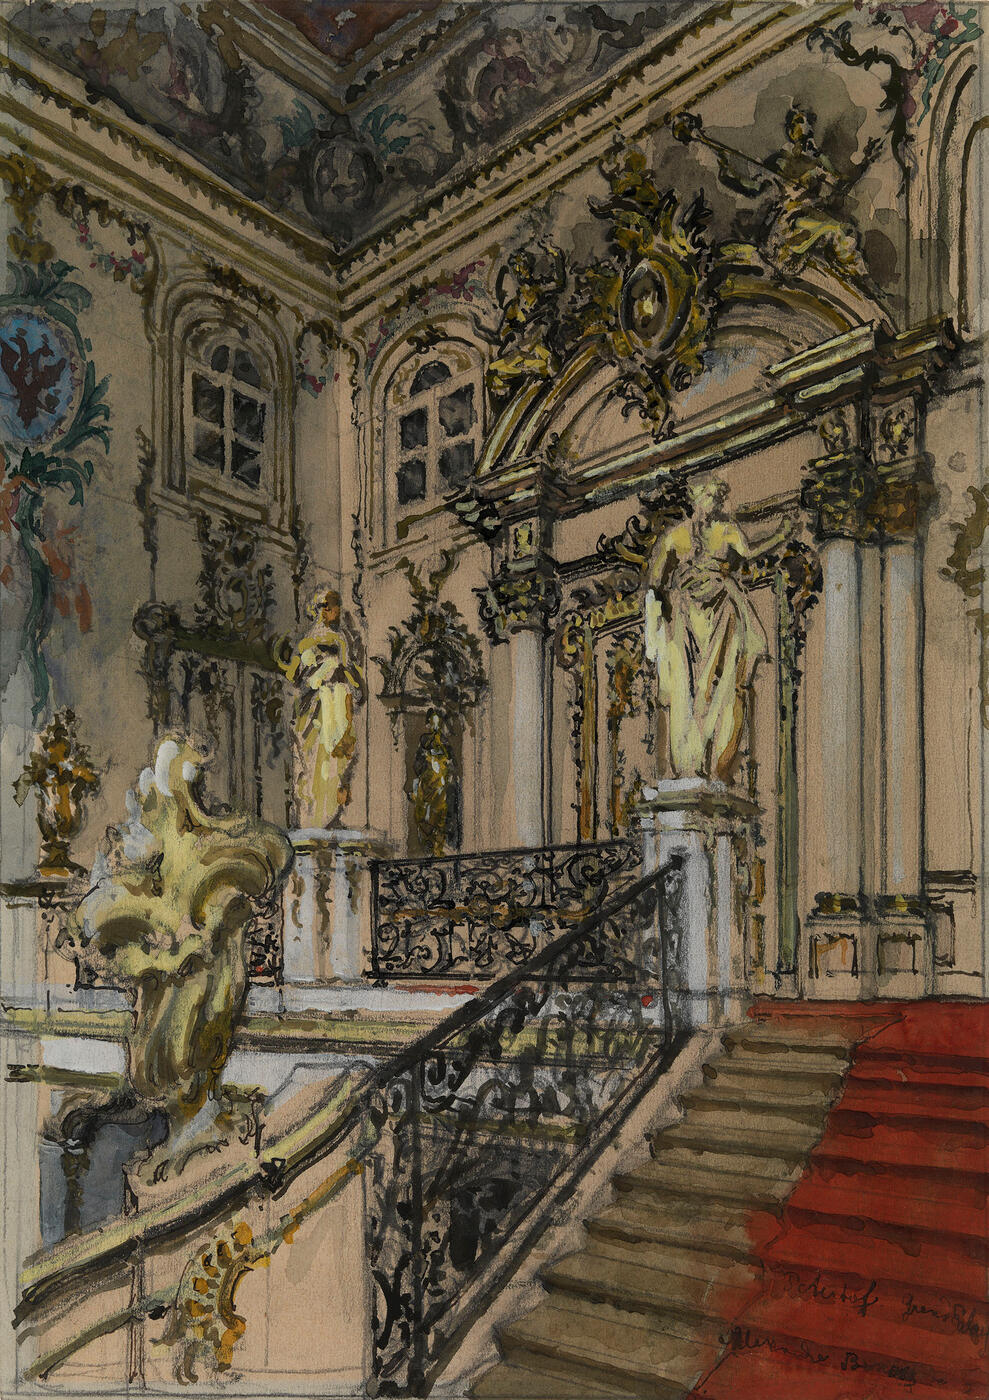 The Main Staircase at the Peterhof Grand Palace